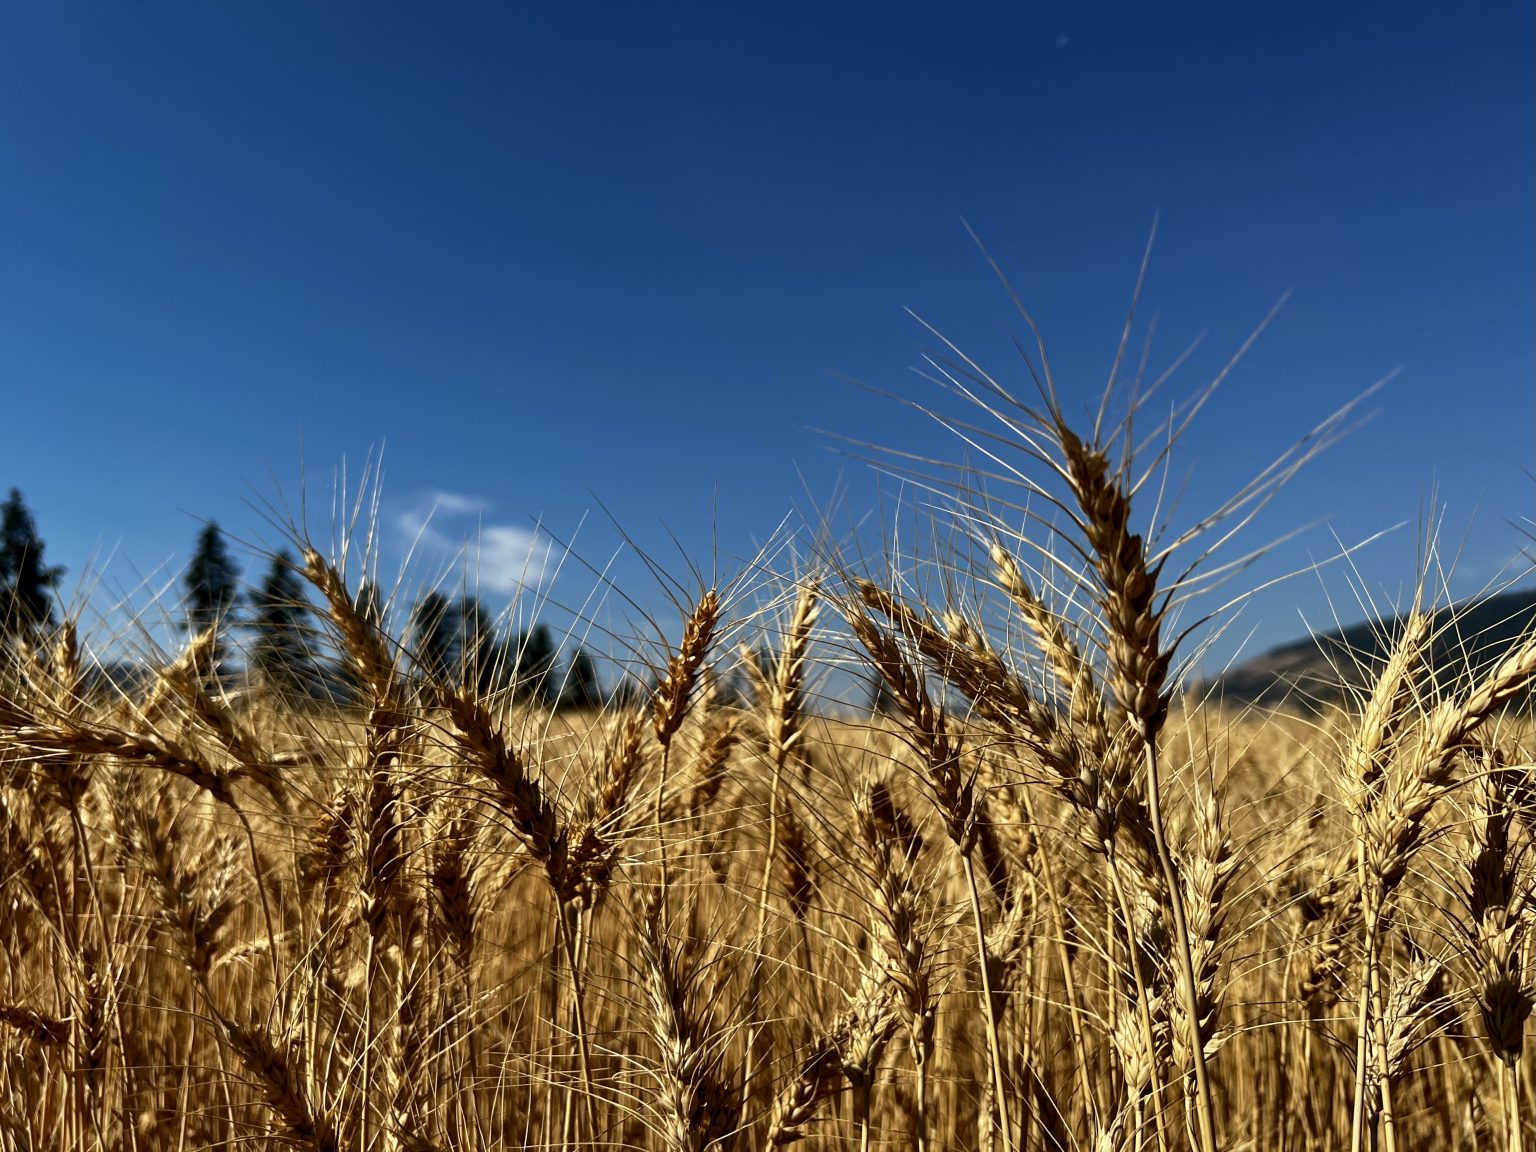 Wheat field with blue sky during harvest season. Photo contributed by Mary Jane Duford to the WordPress Photo Directory.